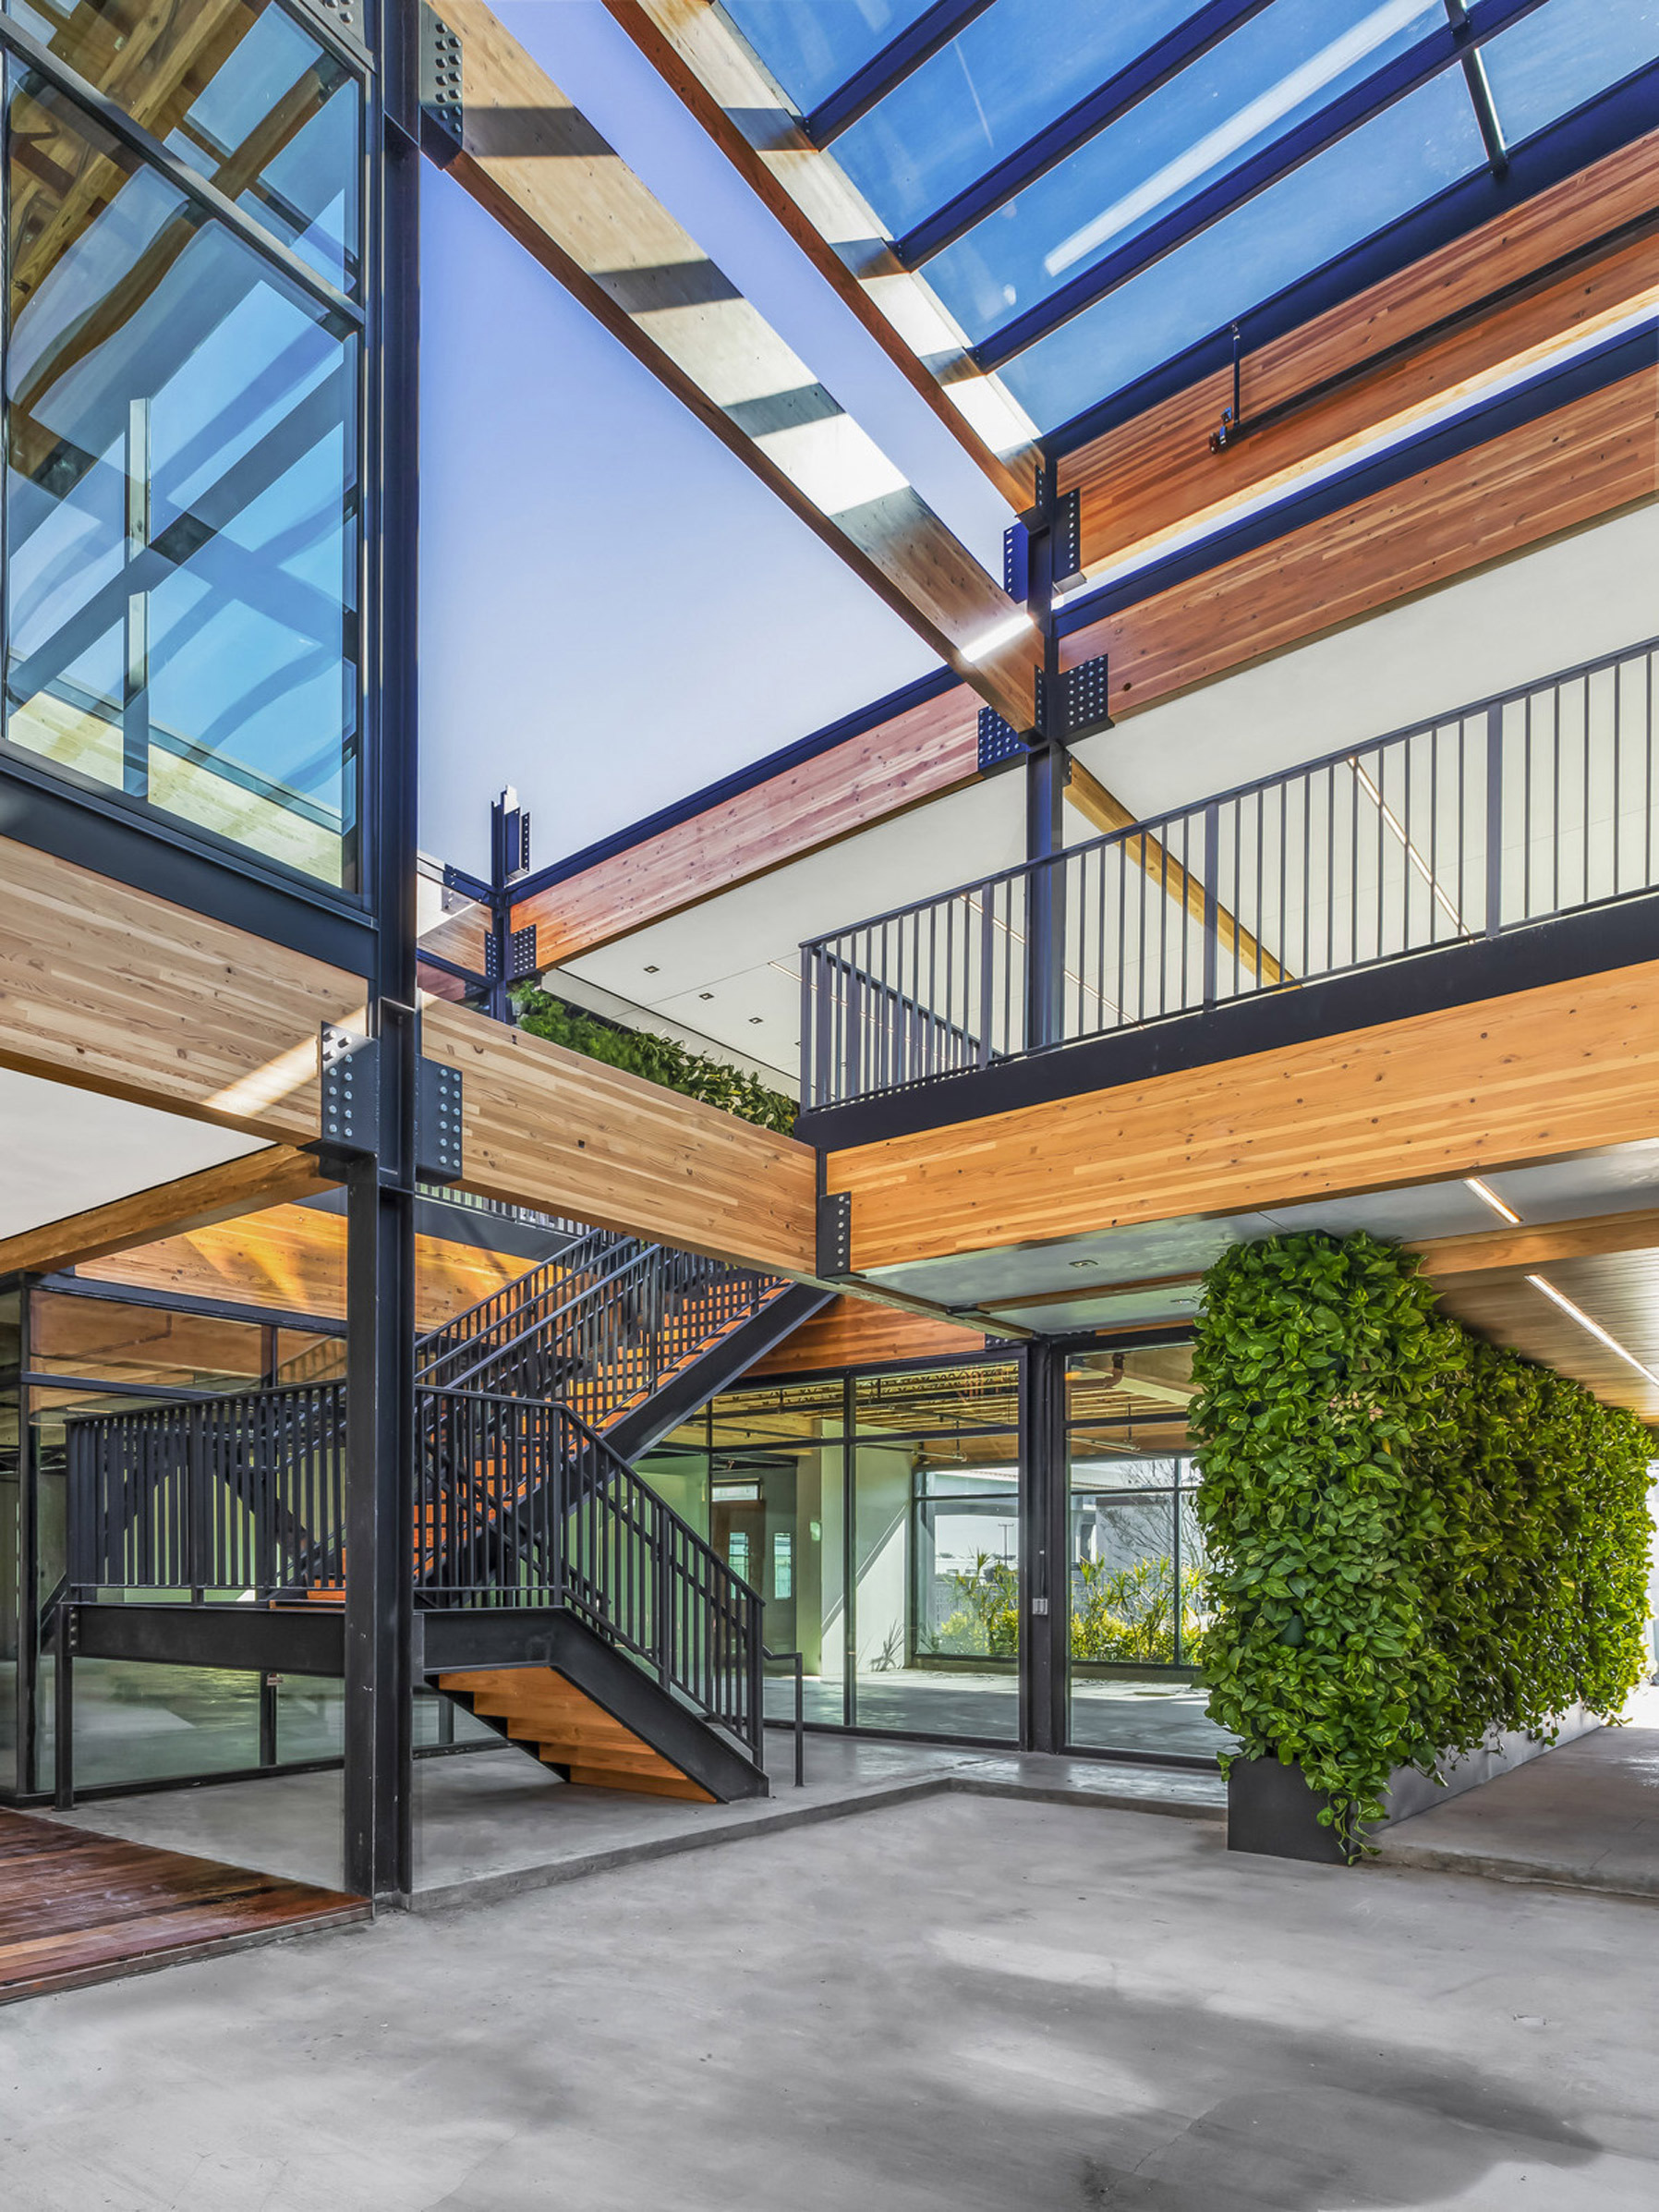 Modern open staircase with steel beams and wooden steps, flanked by a glass facade and skylights, leading to an upper-level gallery featuring natural wood flooring and railing, complemented by an indoor vertical garden.